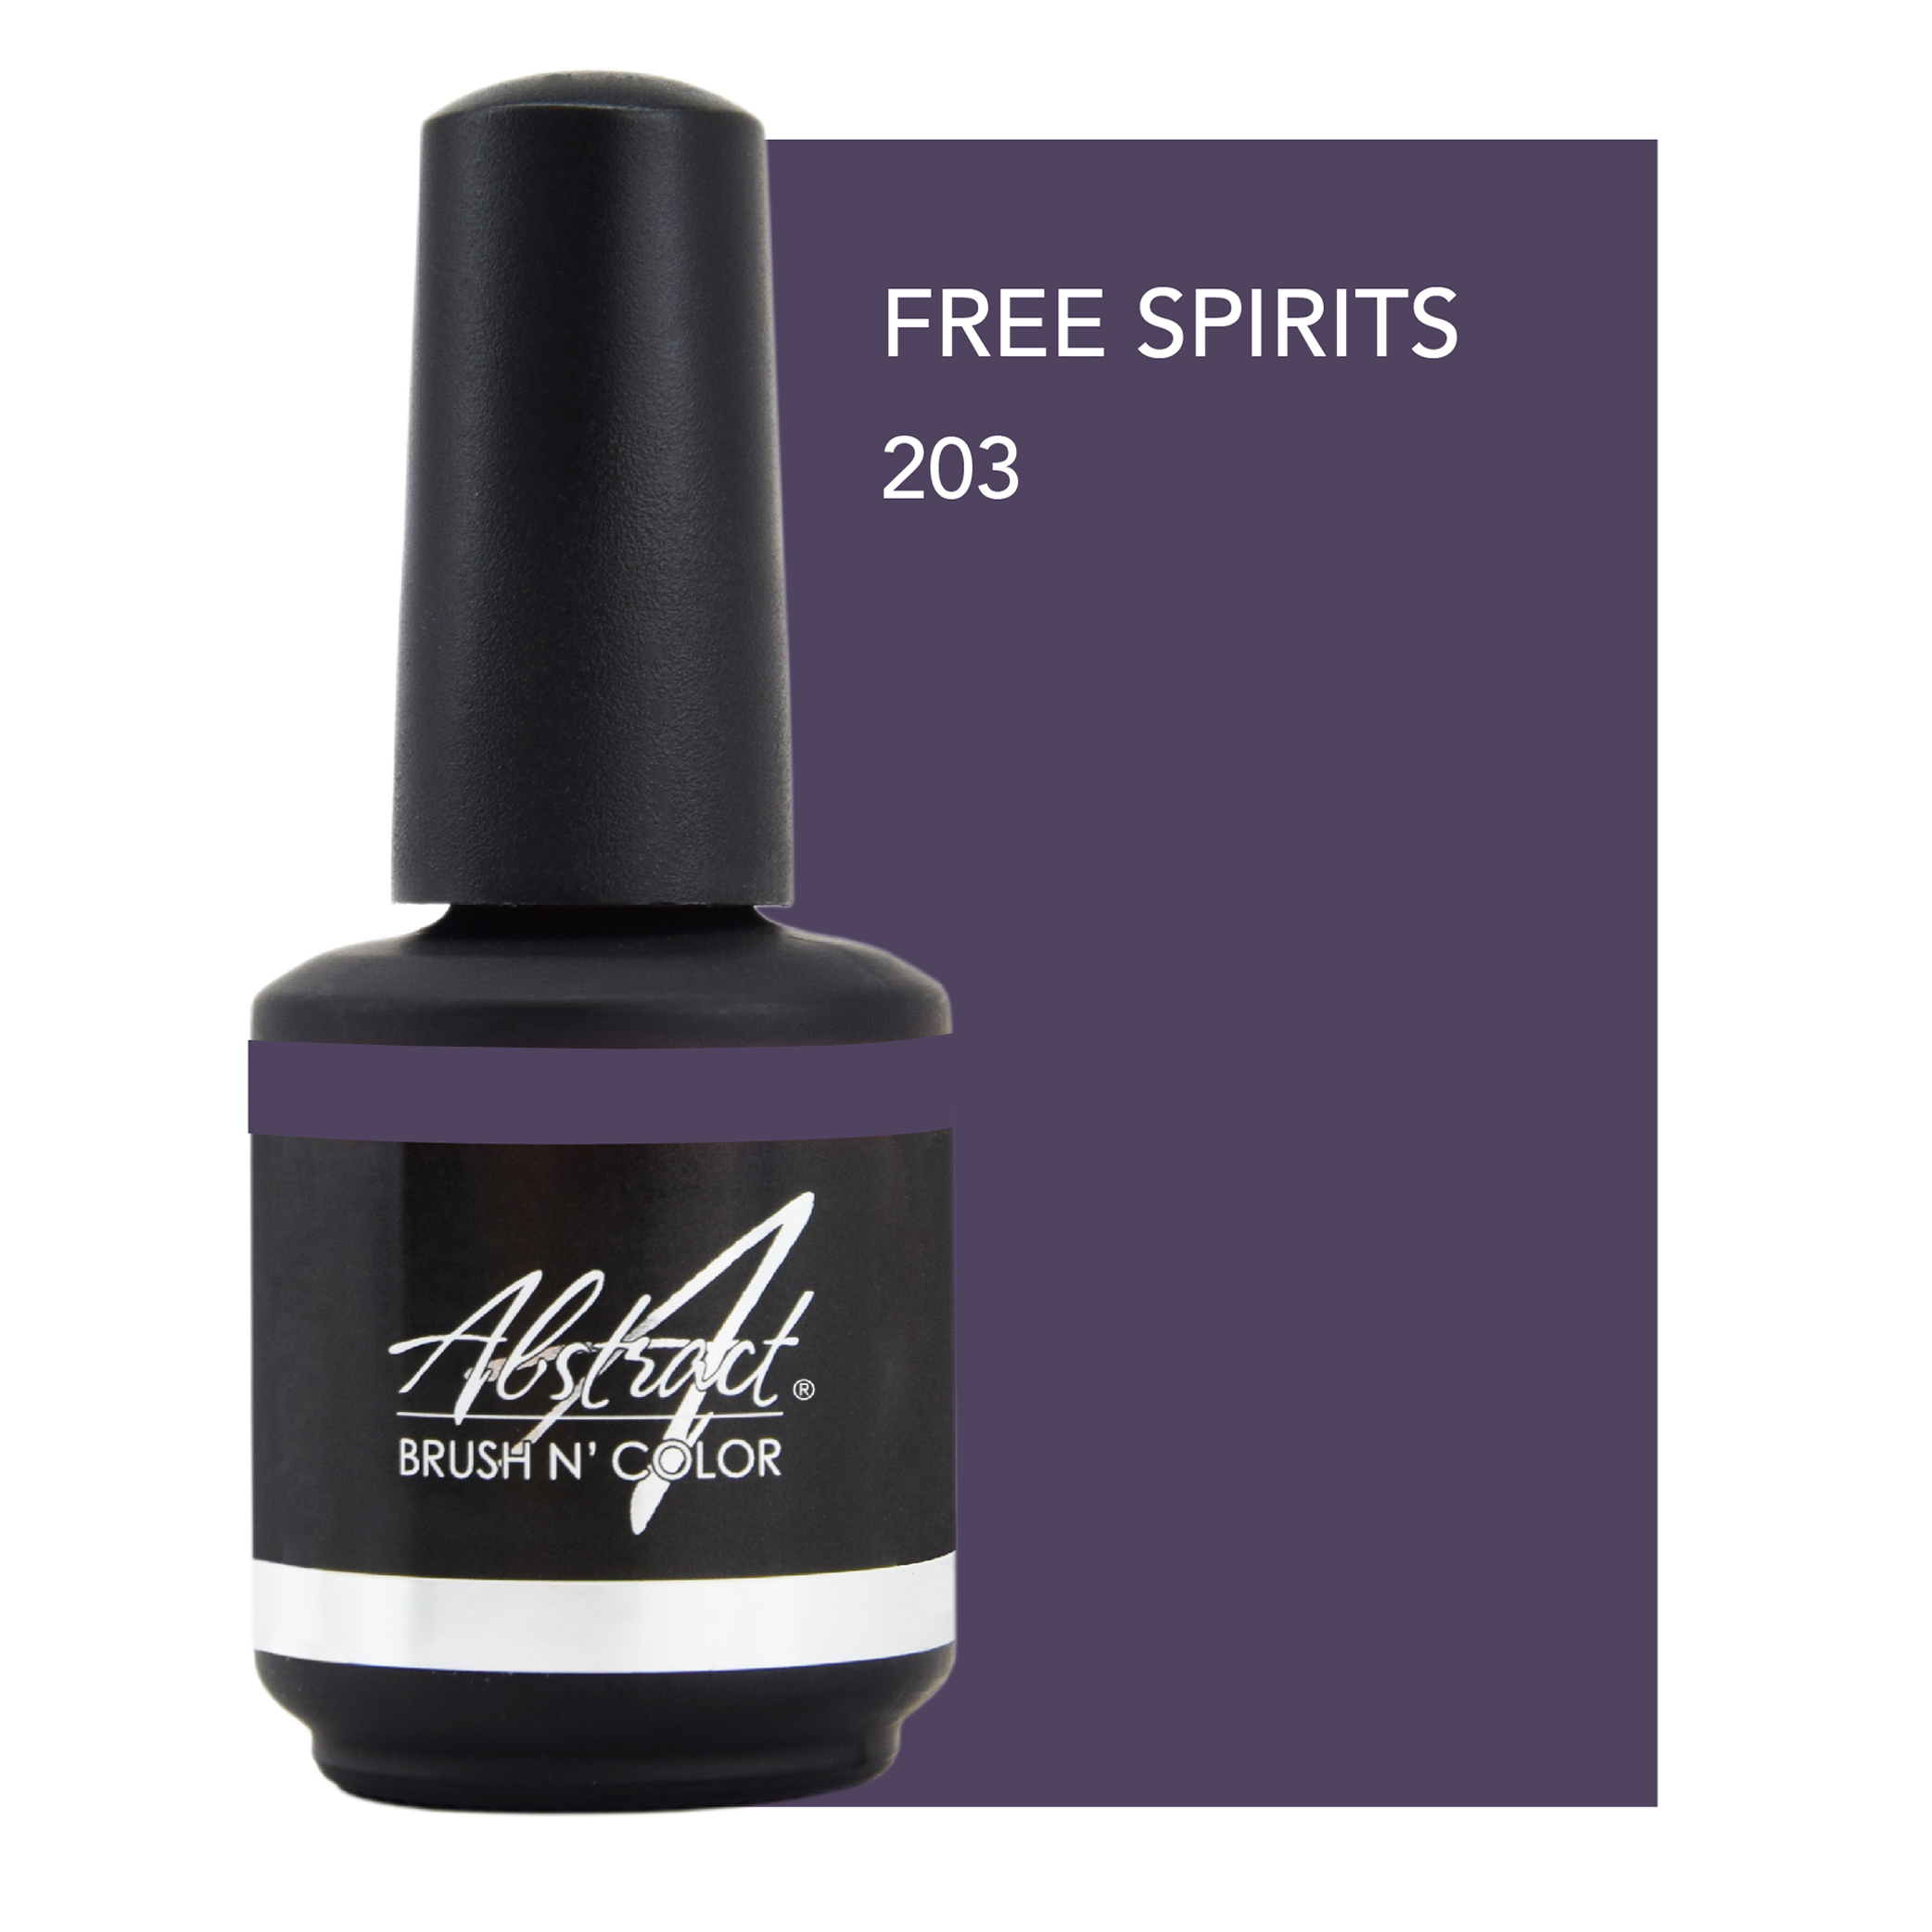 203* Free Spirits 15ml (Good Vibes Only), Abstract | 233125